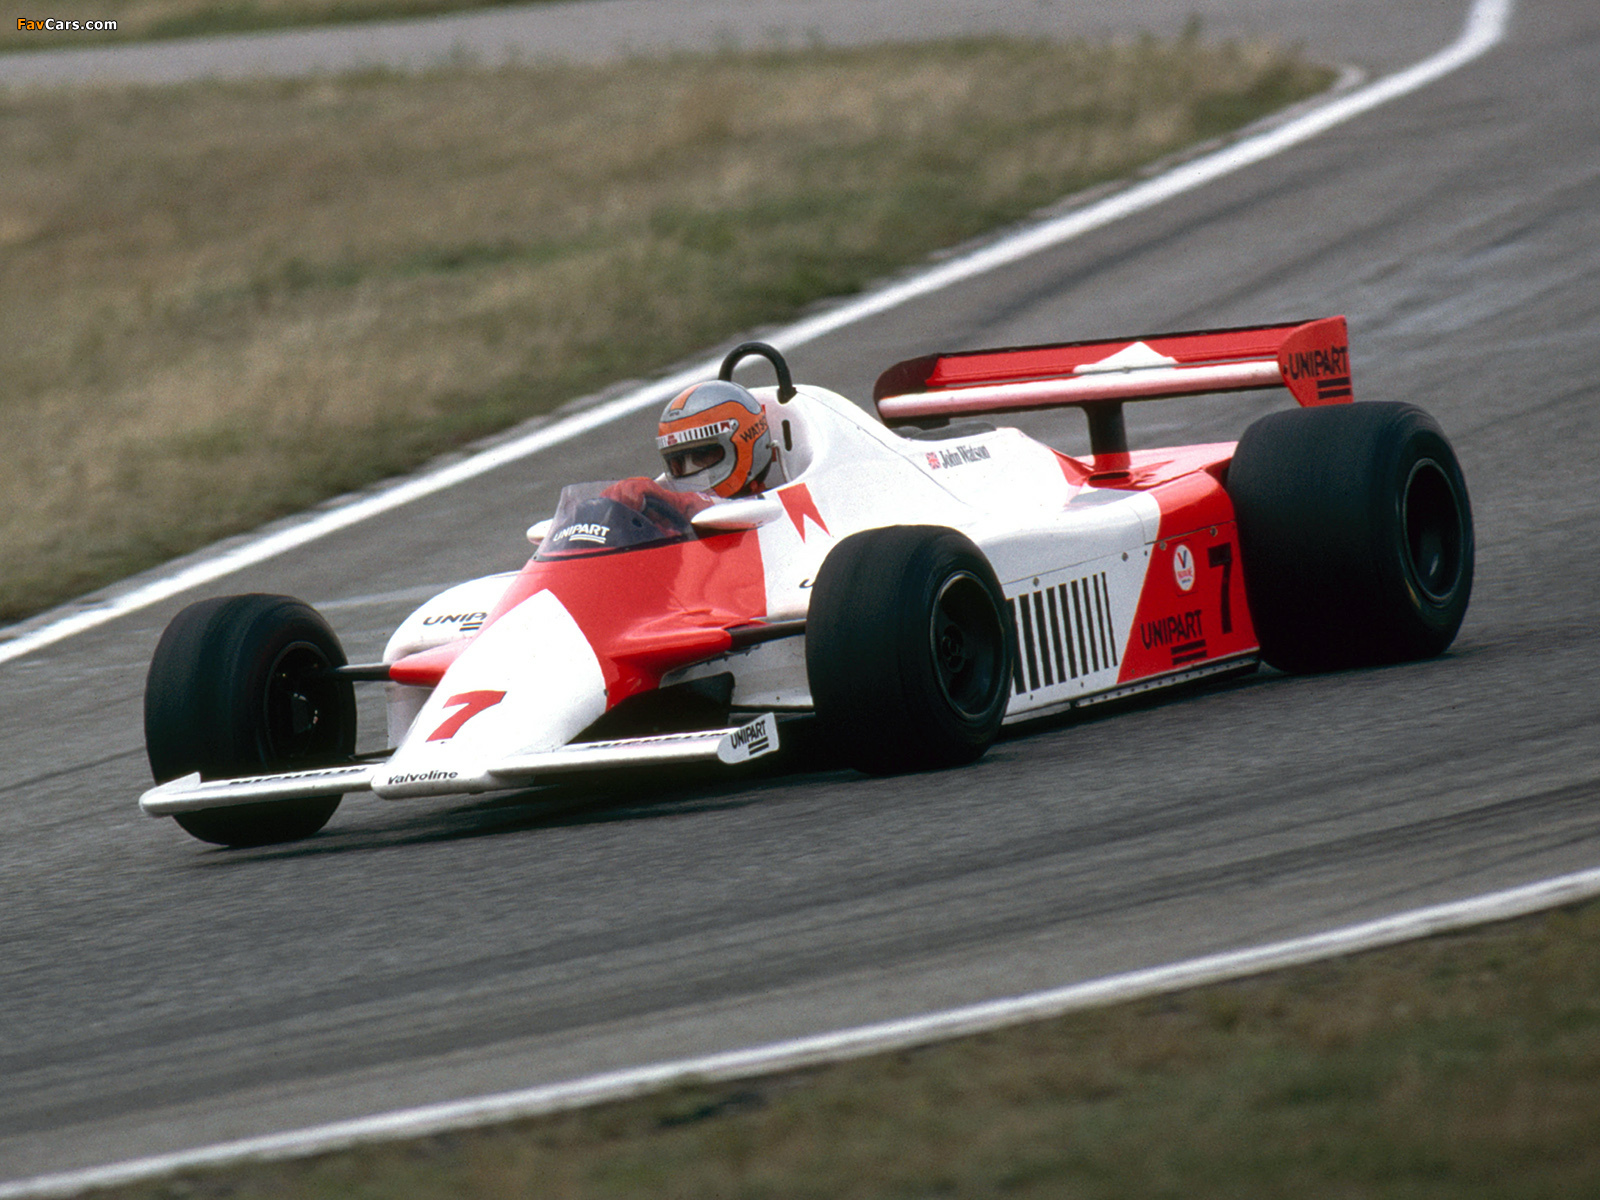 First Light – The story behind the McLaren MP4/1